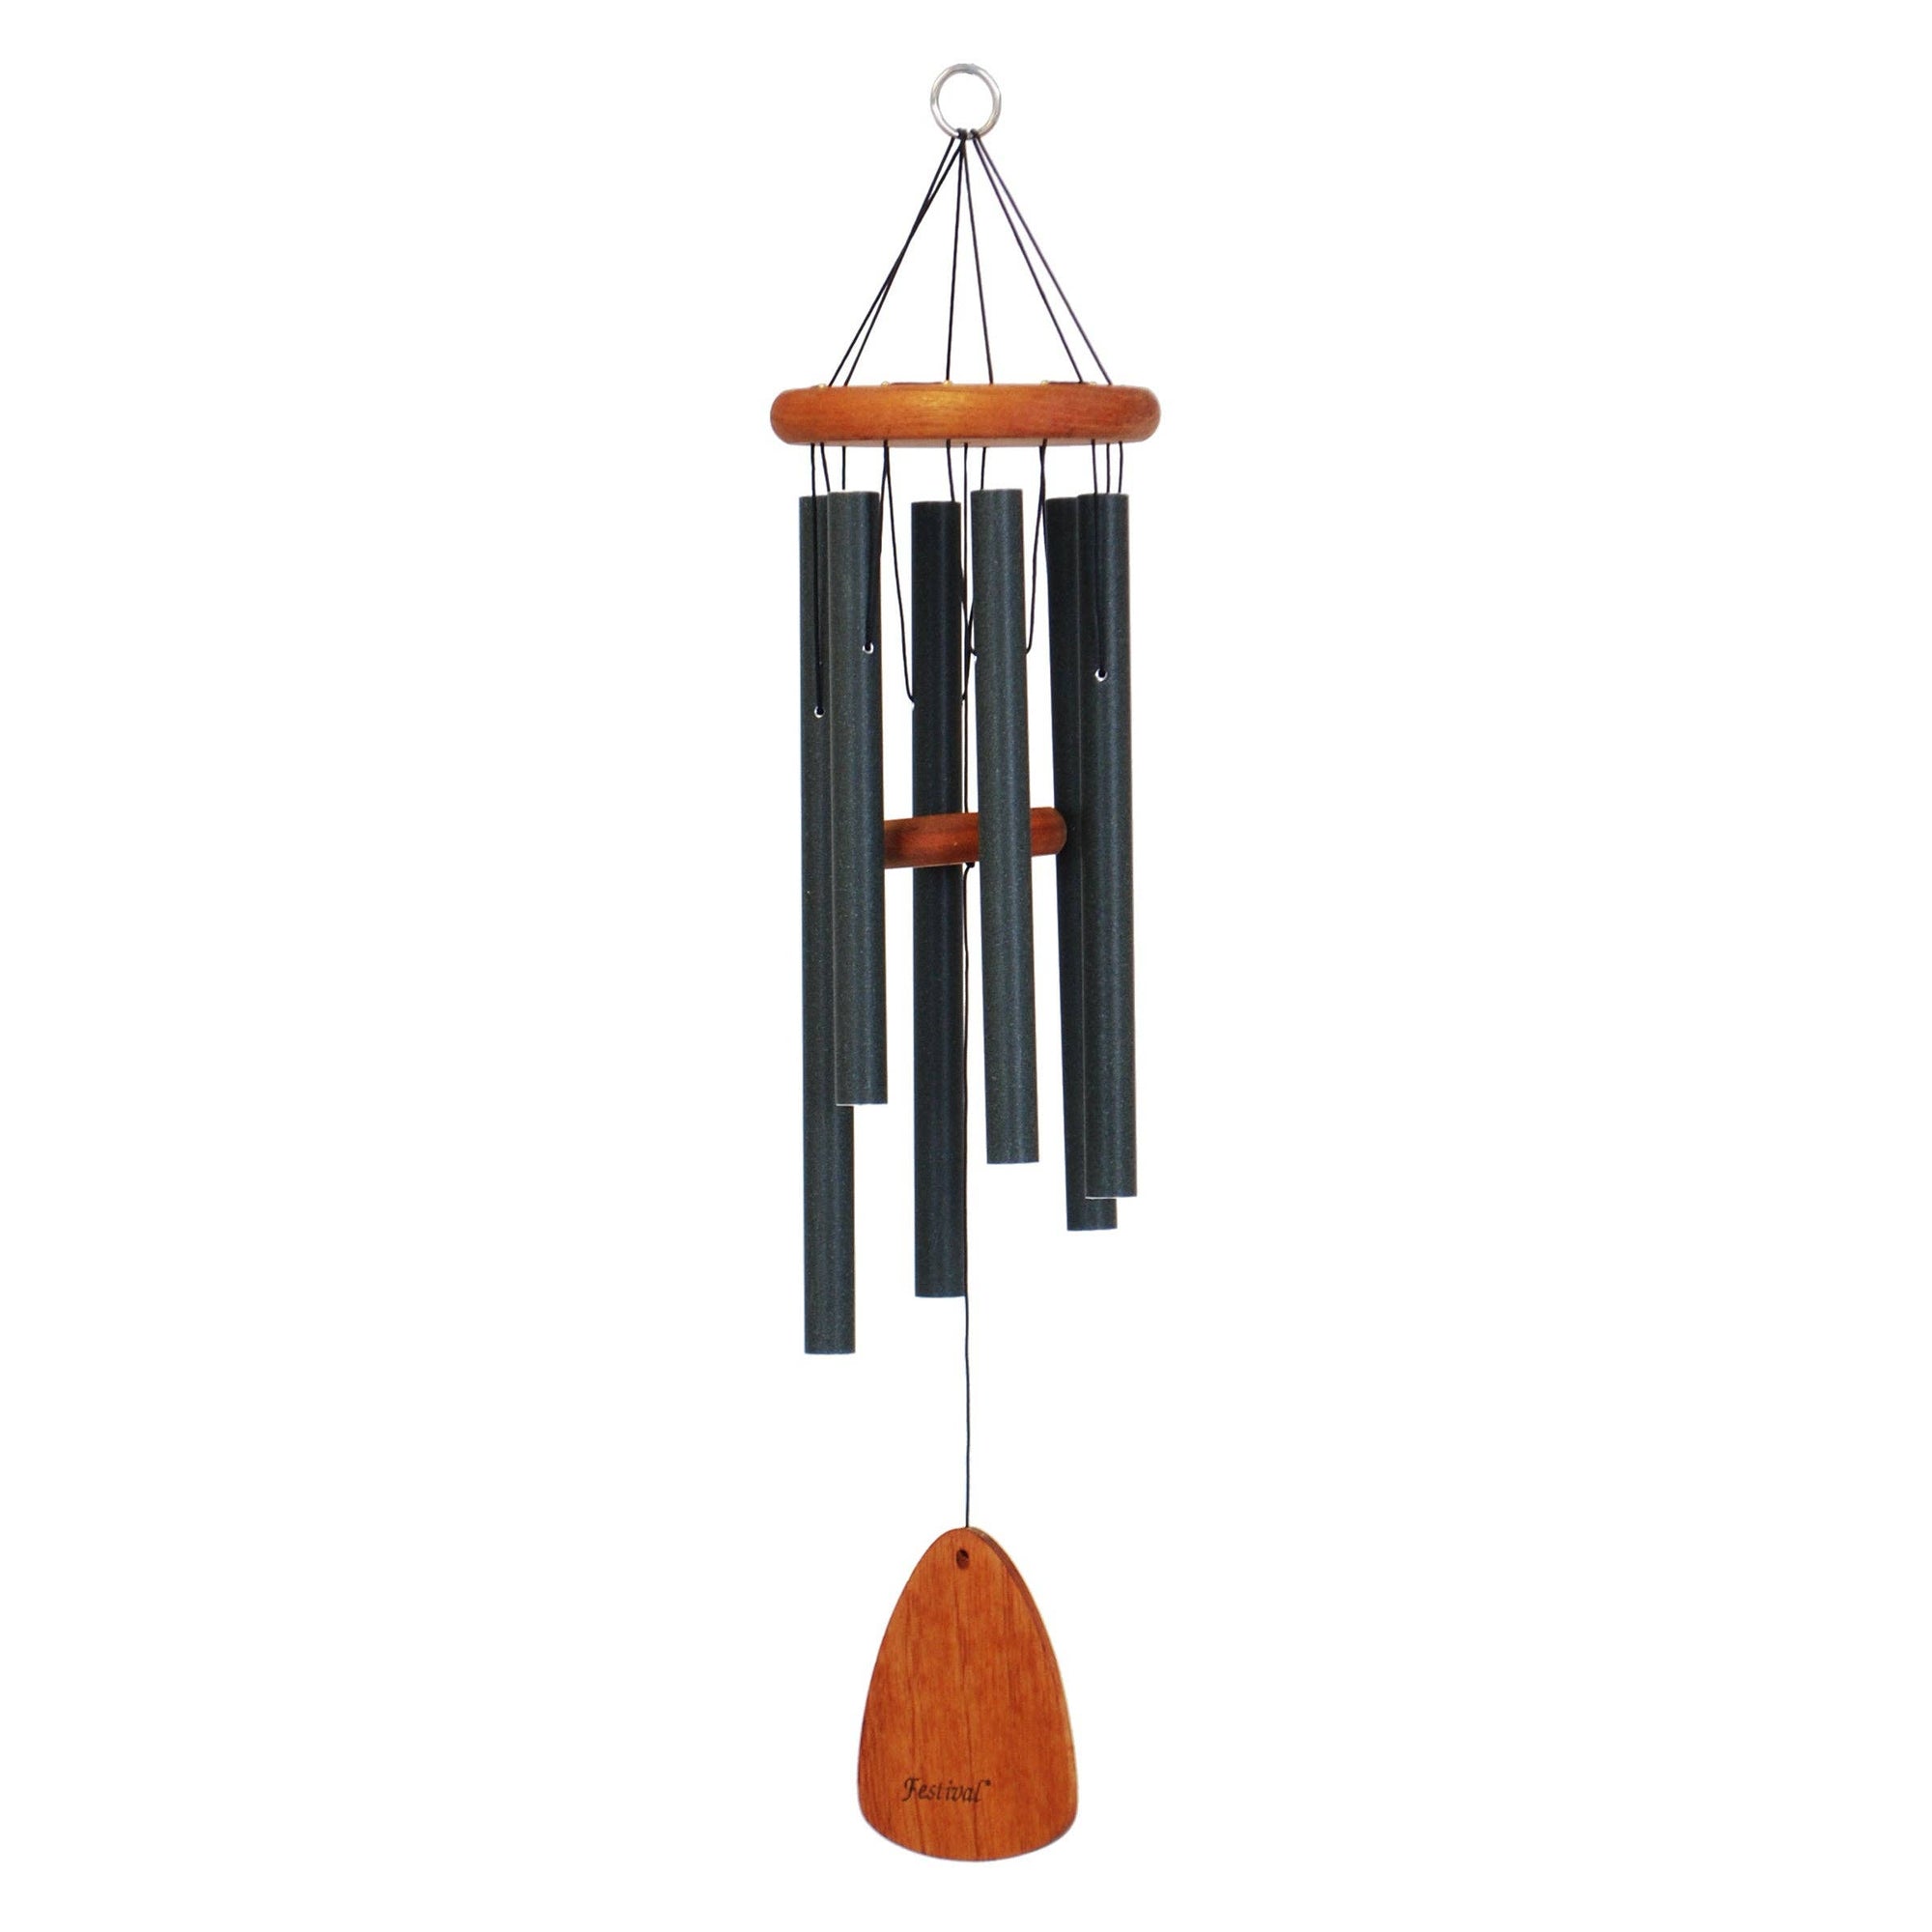 A comforting Festival® 30-inch Windchime hanging on a white background.